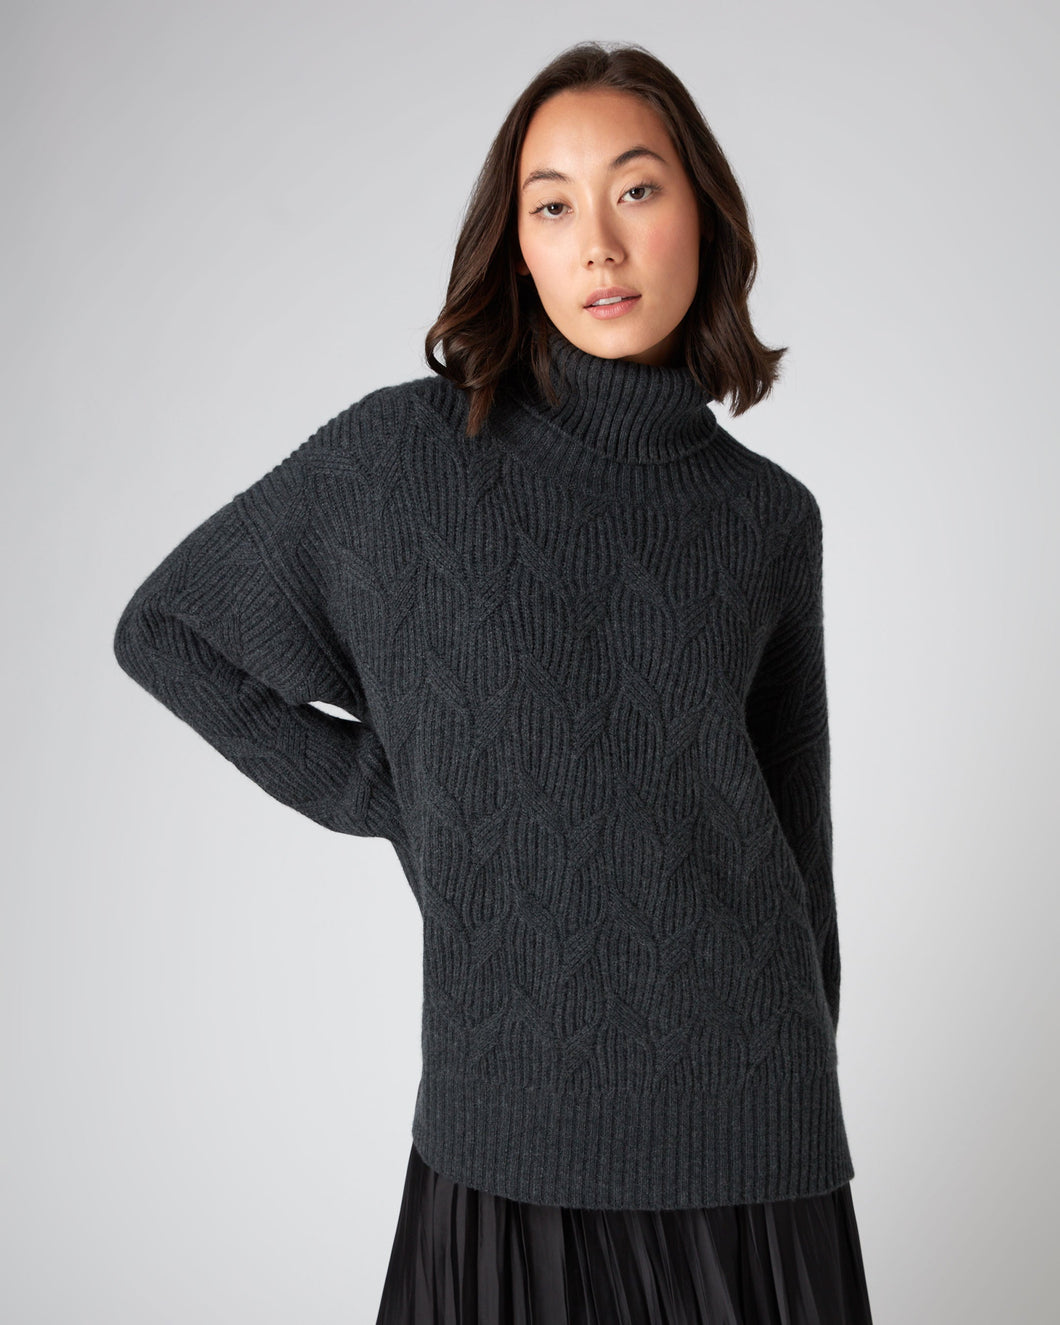 N.Peal Women's Chunky Cable Cashmere Jumper Dark Charcoal Grey